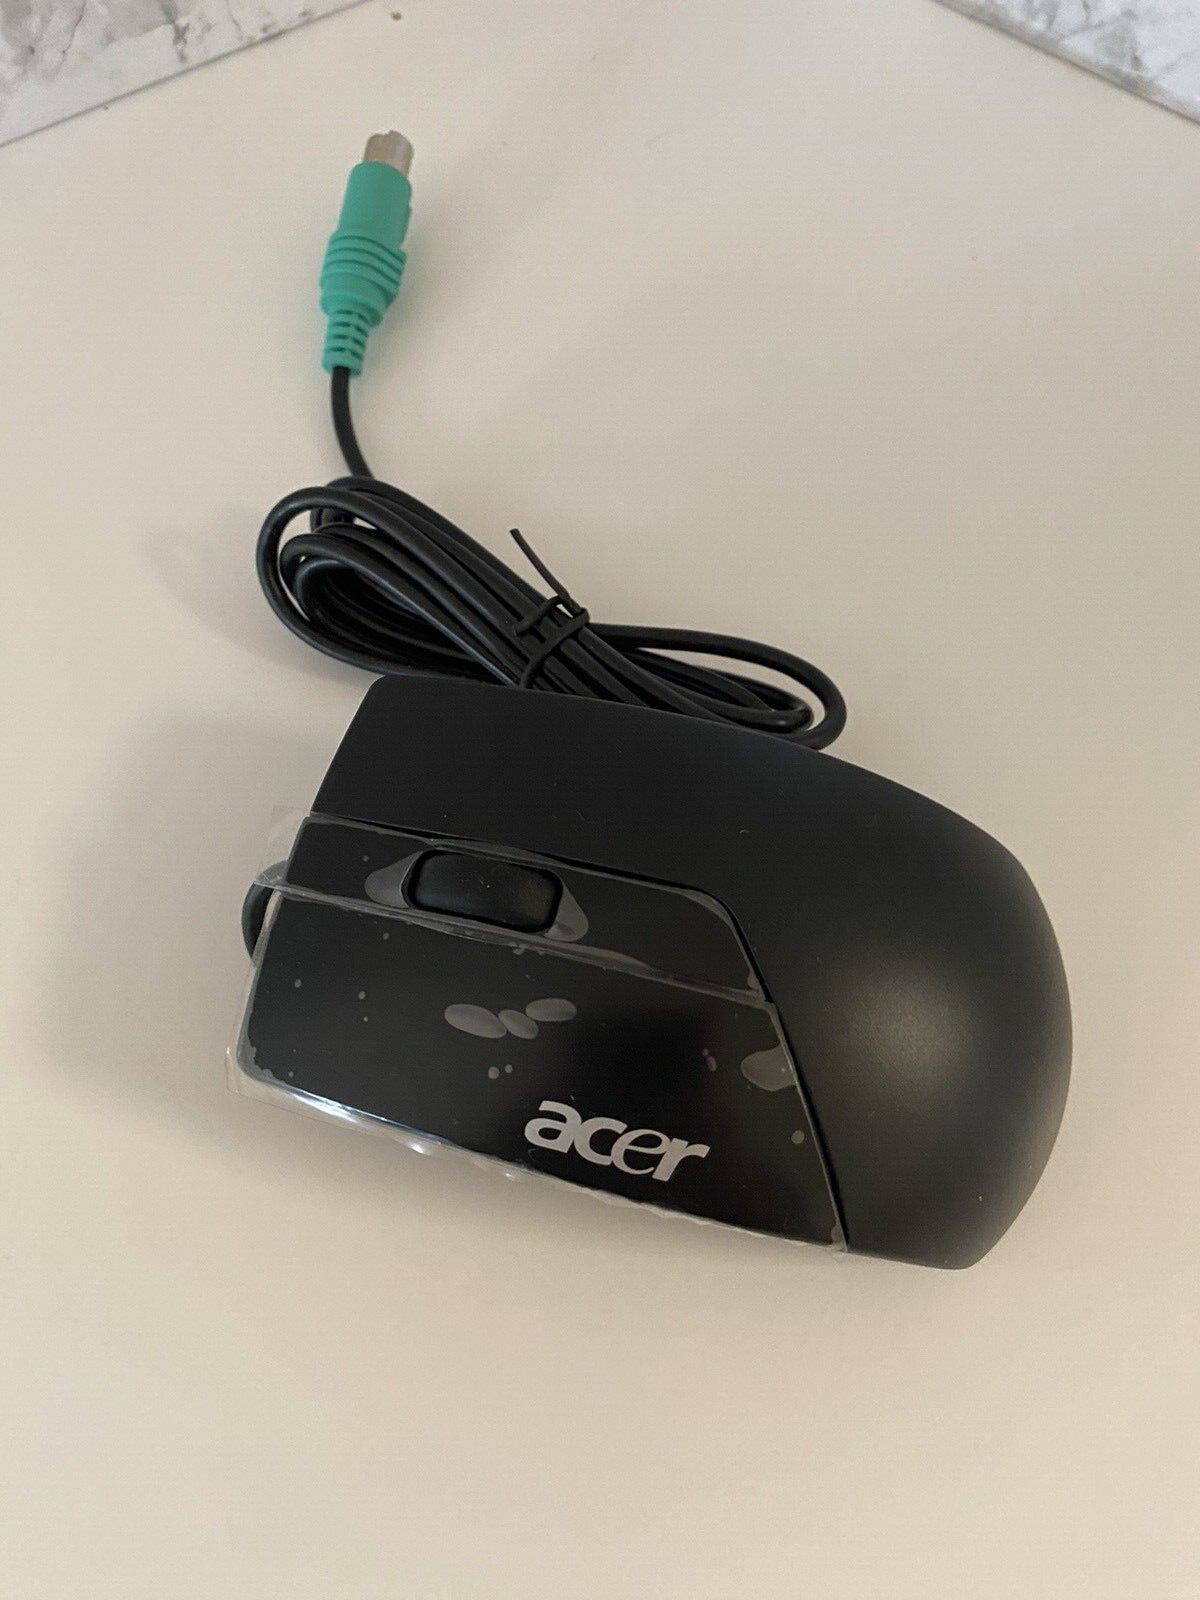 Genuine Vintage Acer Computer Mouse Wired Black Wheel Gaming PC - NEW